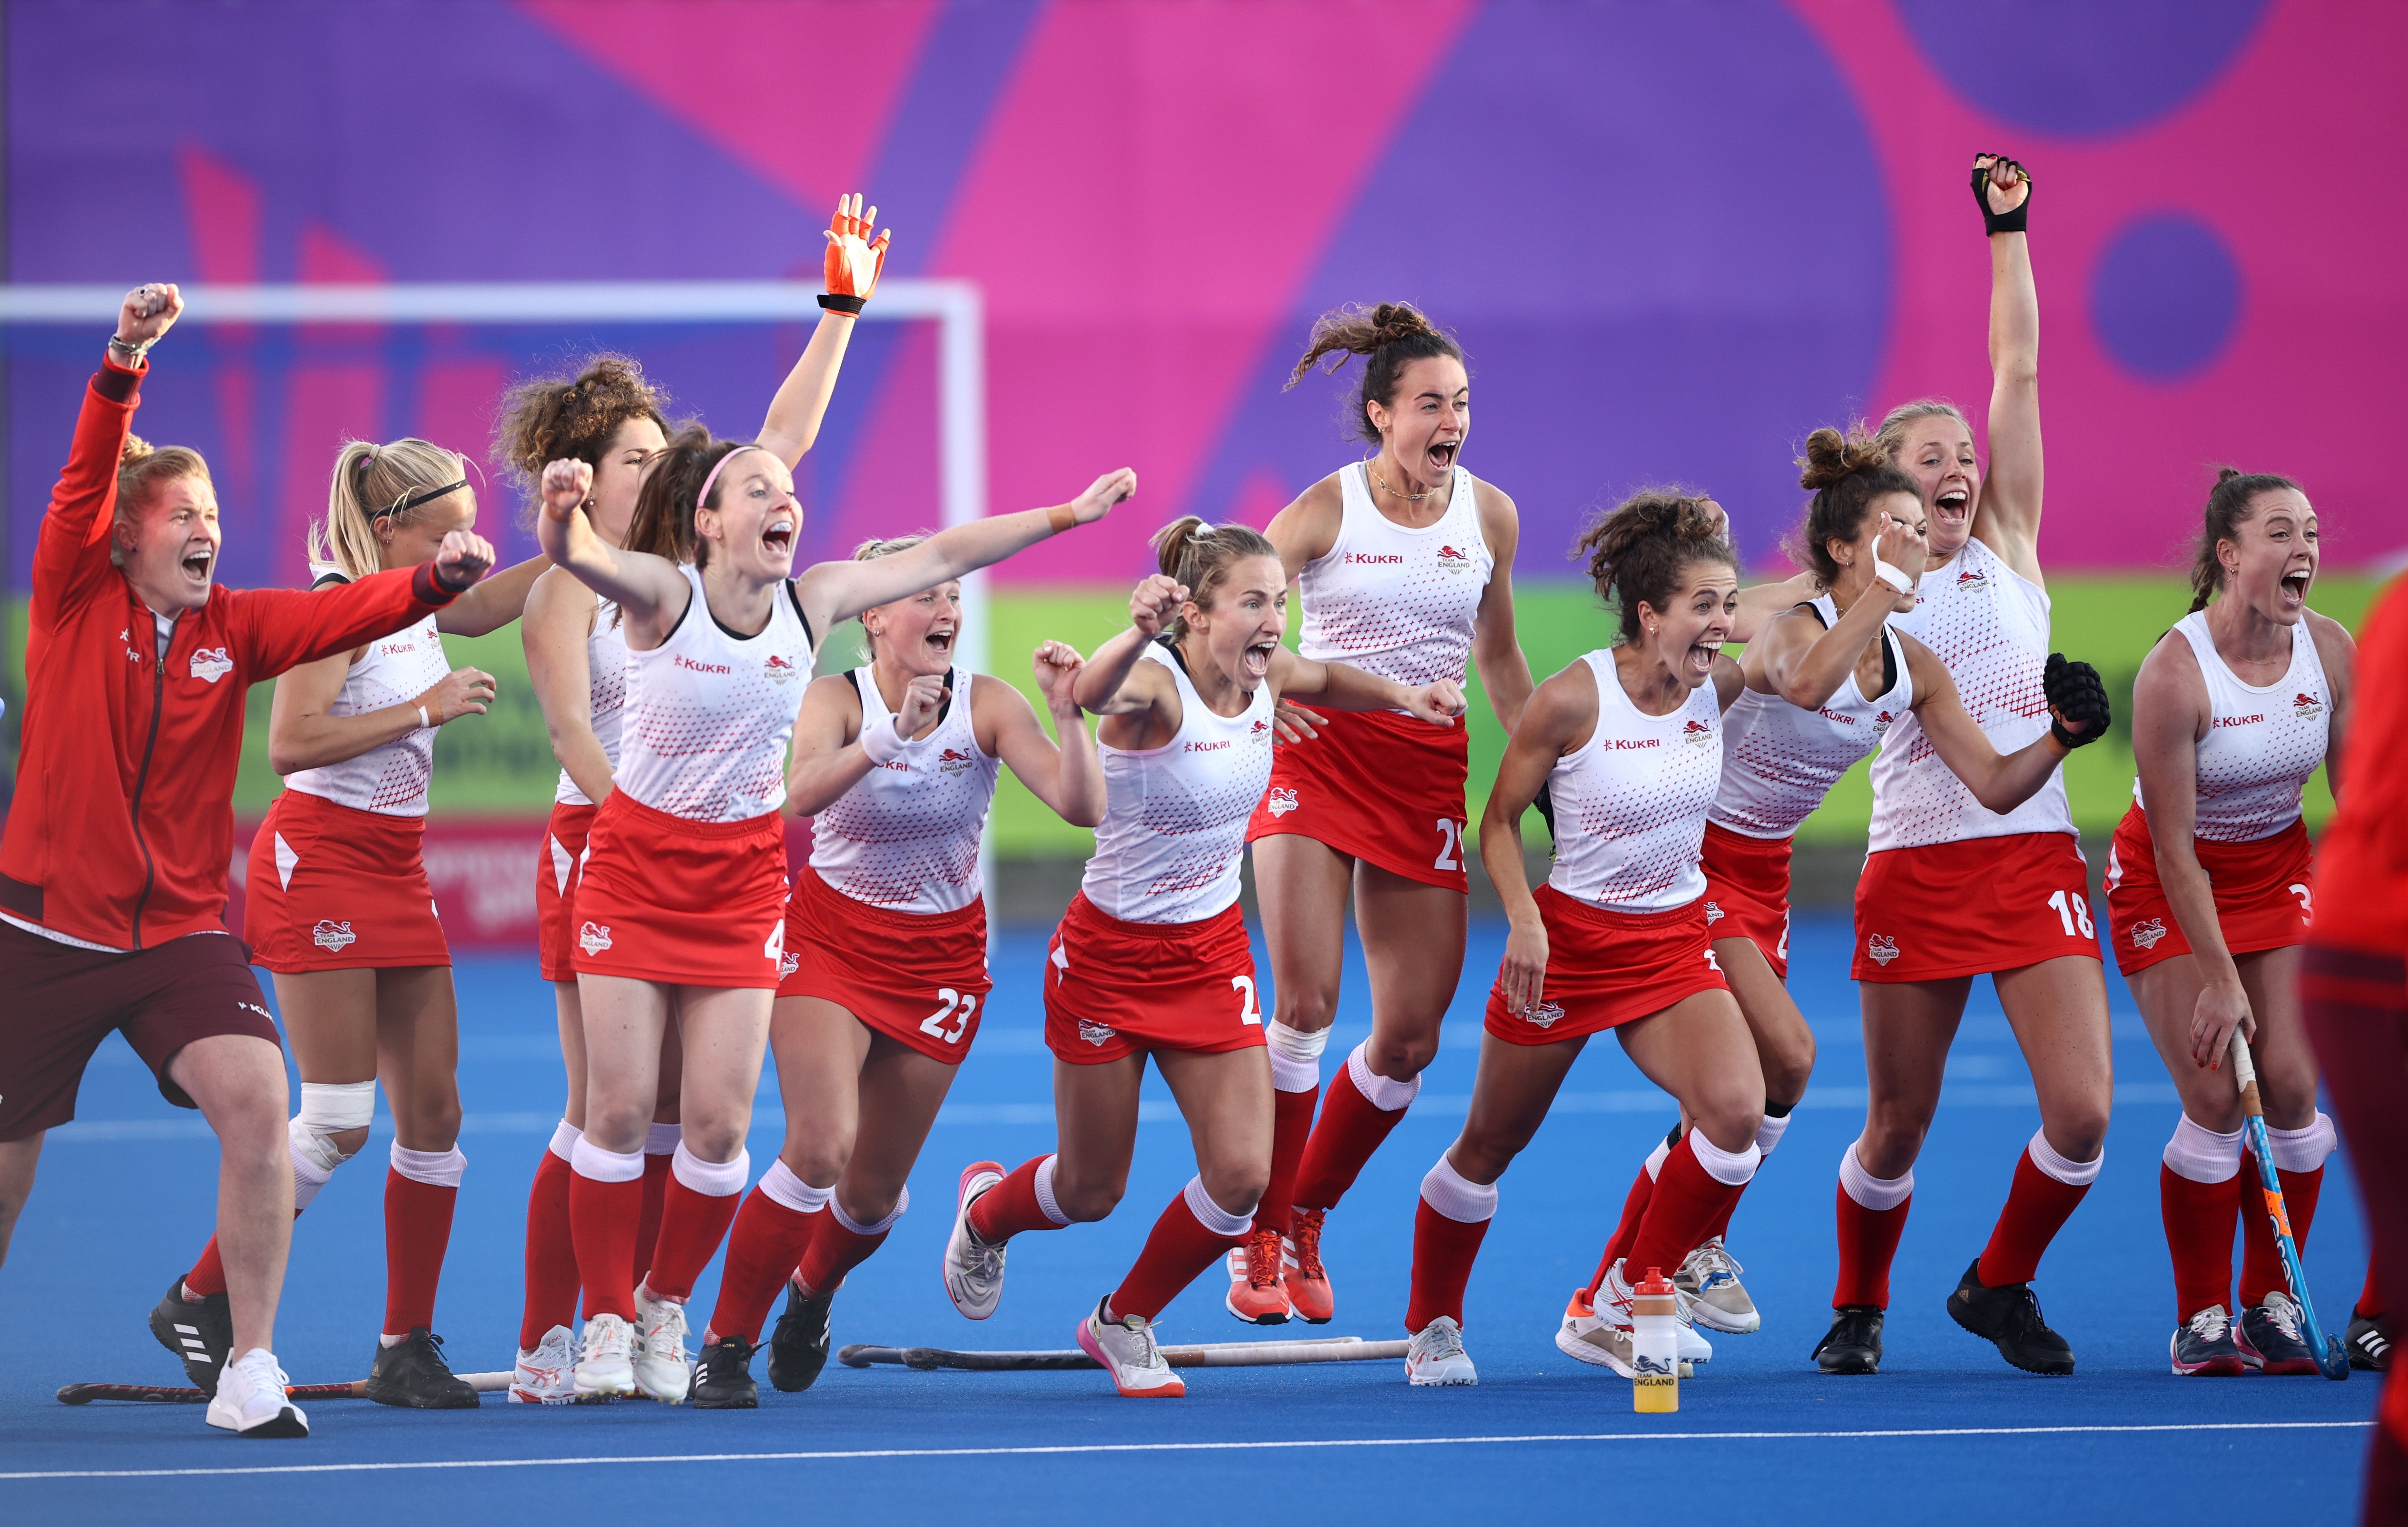 England celebrate winning the penalty shootout in the semi-final